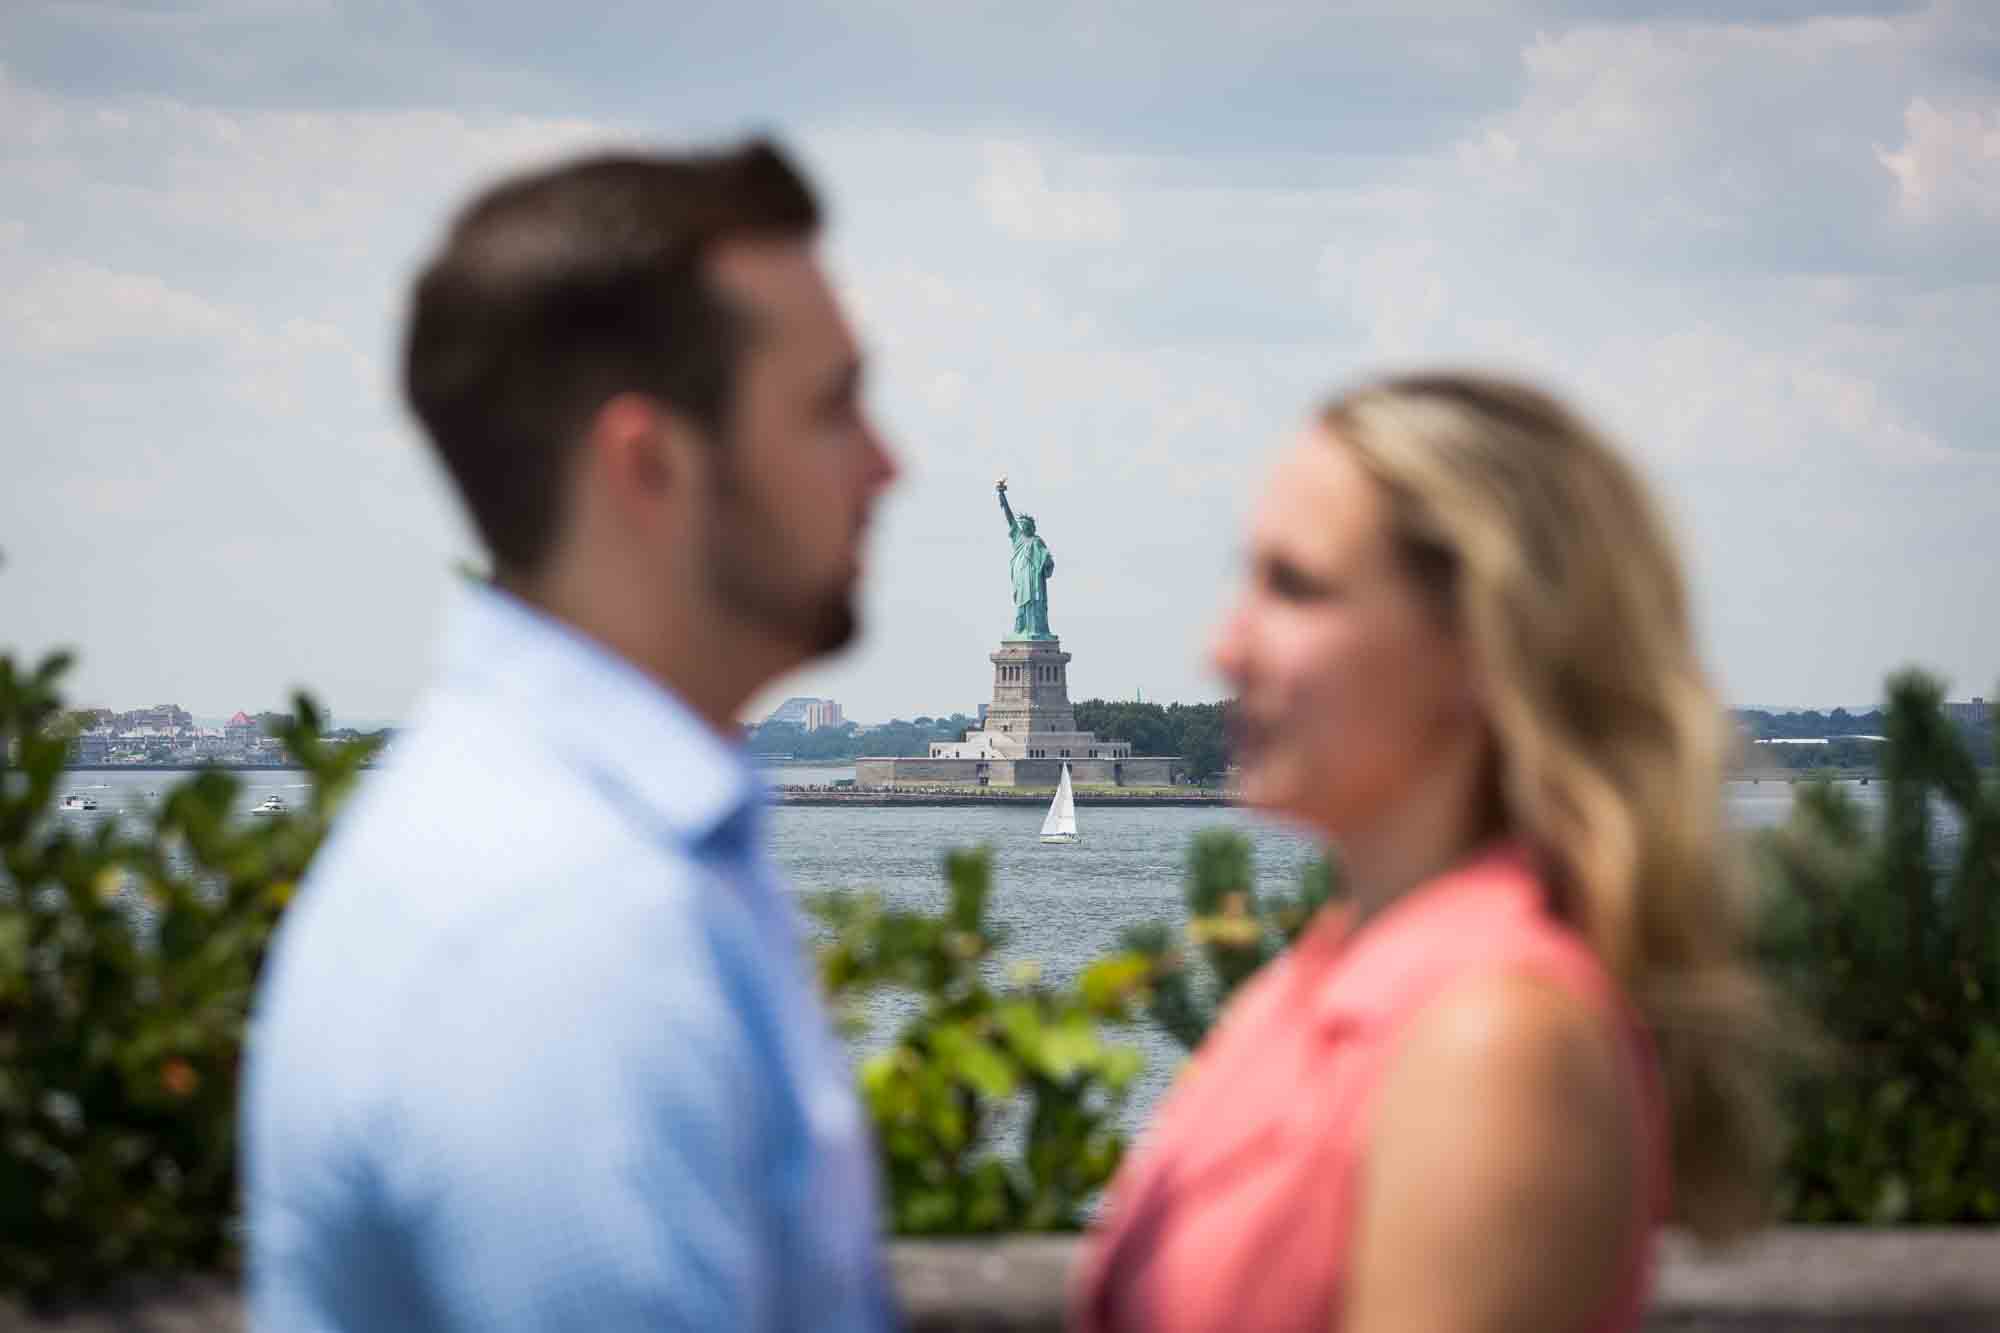 Statue of Liberty in background with couple out of focus in the foreground